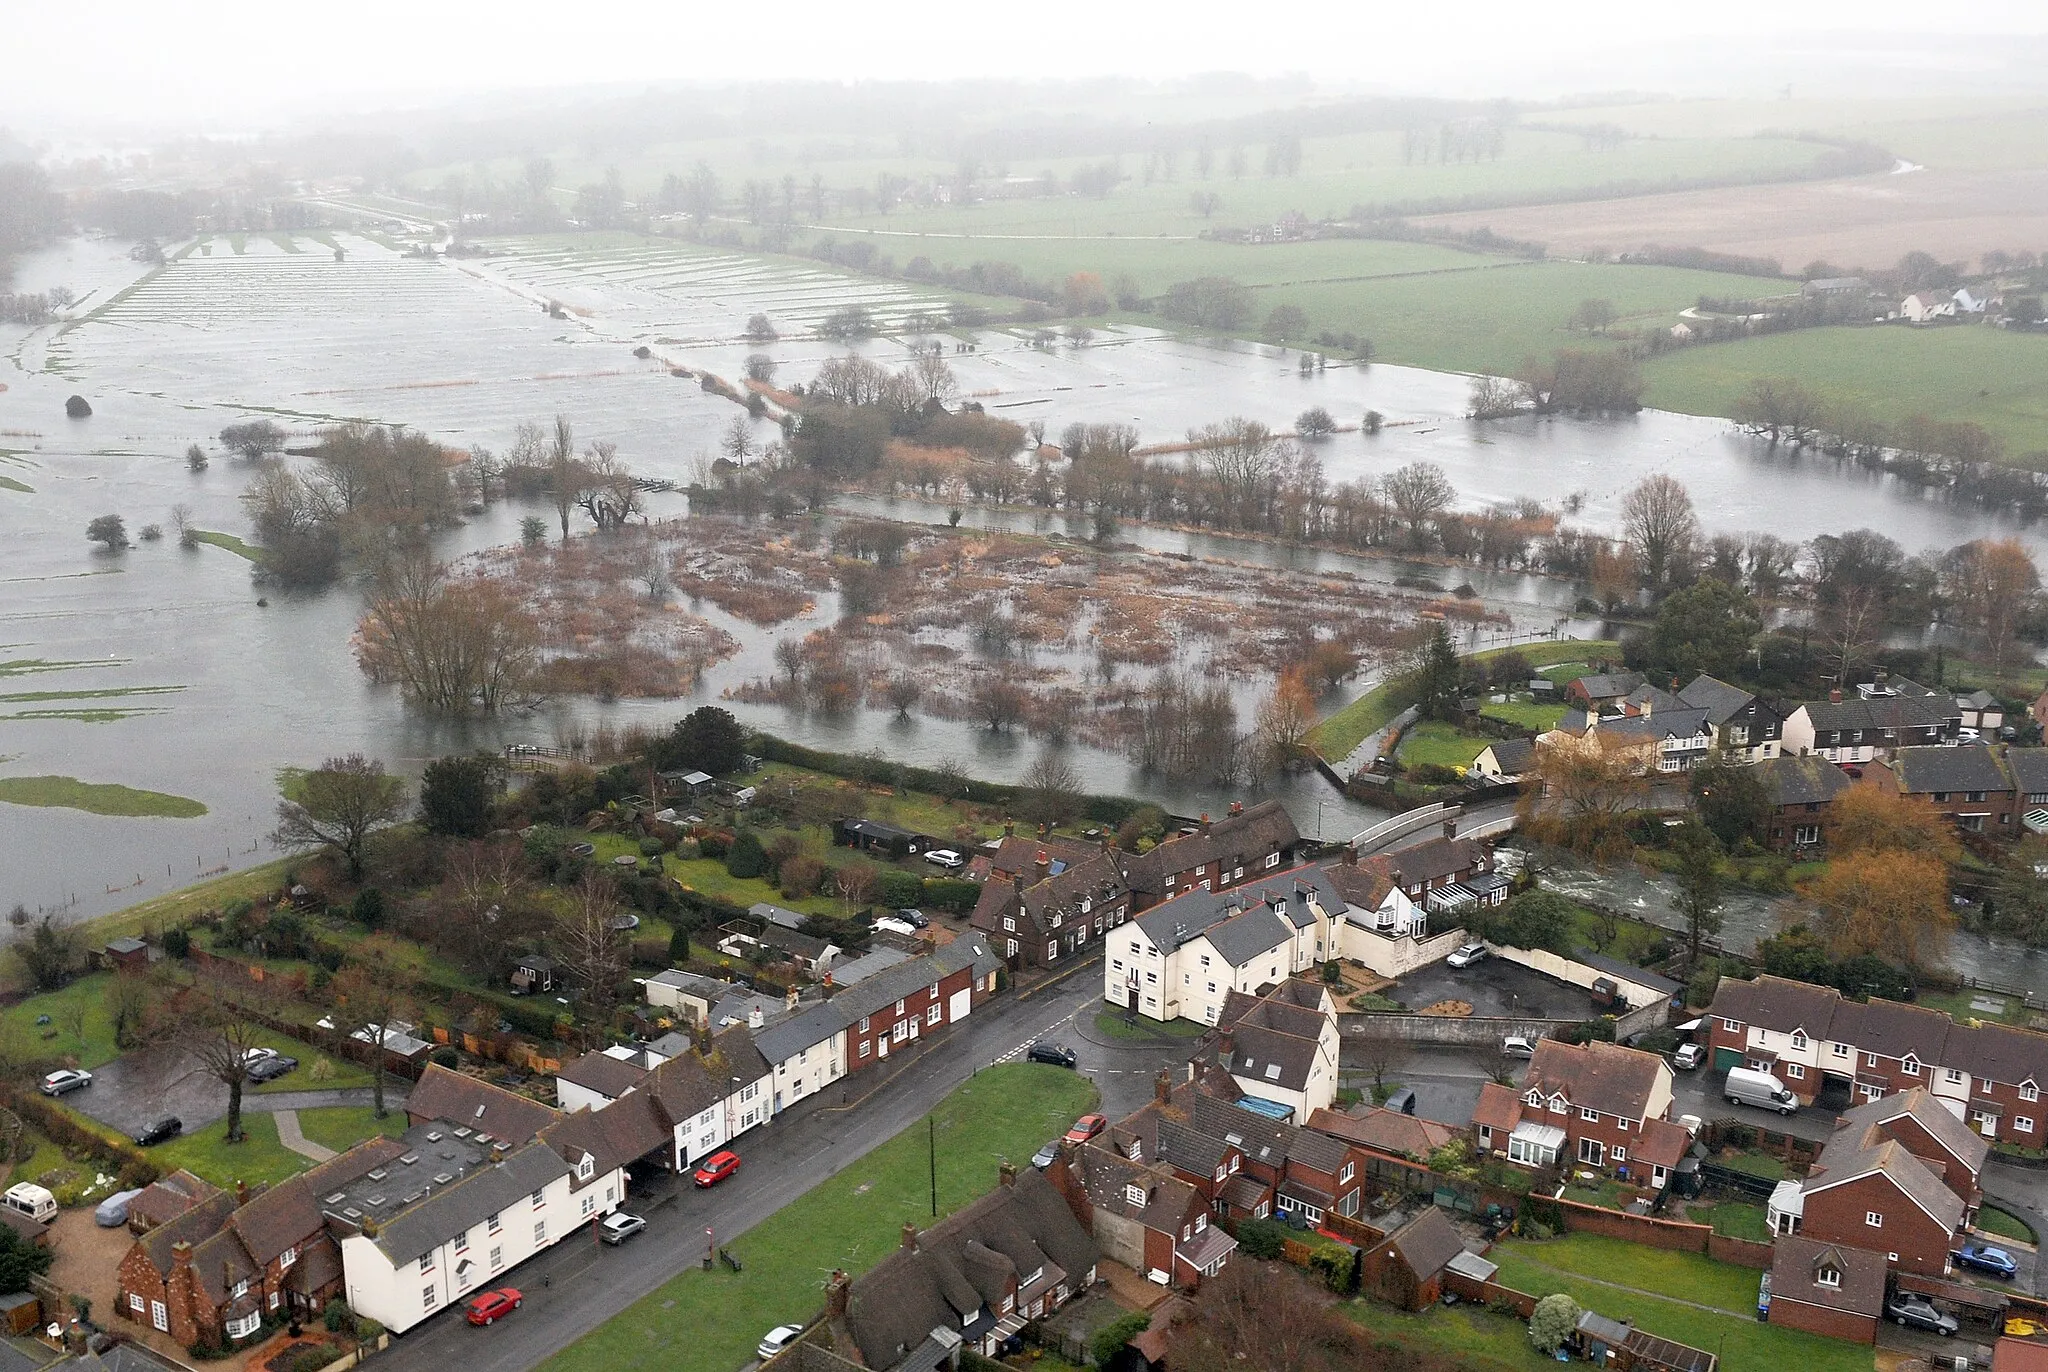 Photo showing: [Correction: the location has been identified by the Unidentified photos of the British Isles Group on Facebook as Downton in Wiltshire. See Google Street view for confirmation.]
Flooding hits a town in Oxfordshire during the widespread floods of February 2014.
The RAF's Puma and Merlin Helicopter Forces joined the UK flood relief operation, supporting efforts on the ground from the skies above the south of England.

Organization: RAF
Object Name: BEN-UNCLASS-20140214-138-090
Category: MOD
Supplemental Categories: Operations, Humanitarian
Keywords: Oxfordshire, Flooding, Flood, Humanitarian, Relief, Aid, Help, Assistance, Town, Village, Flooded, Water
Country: England